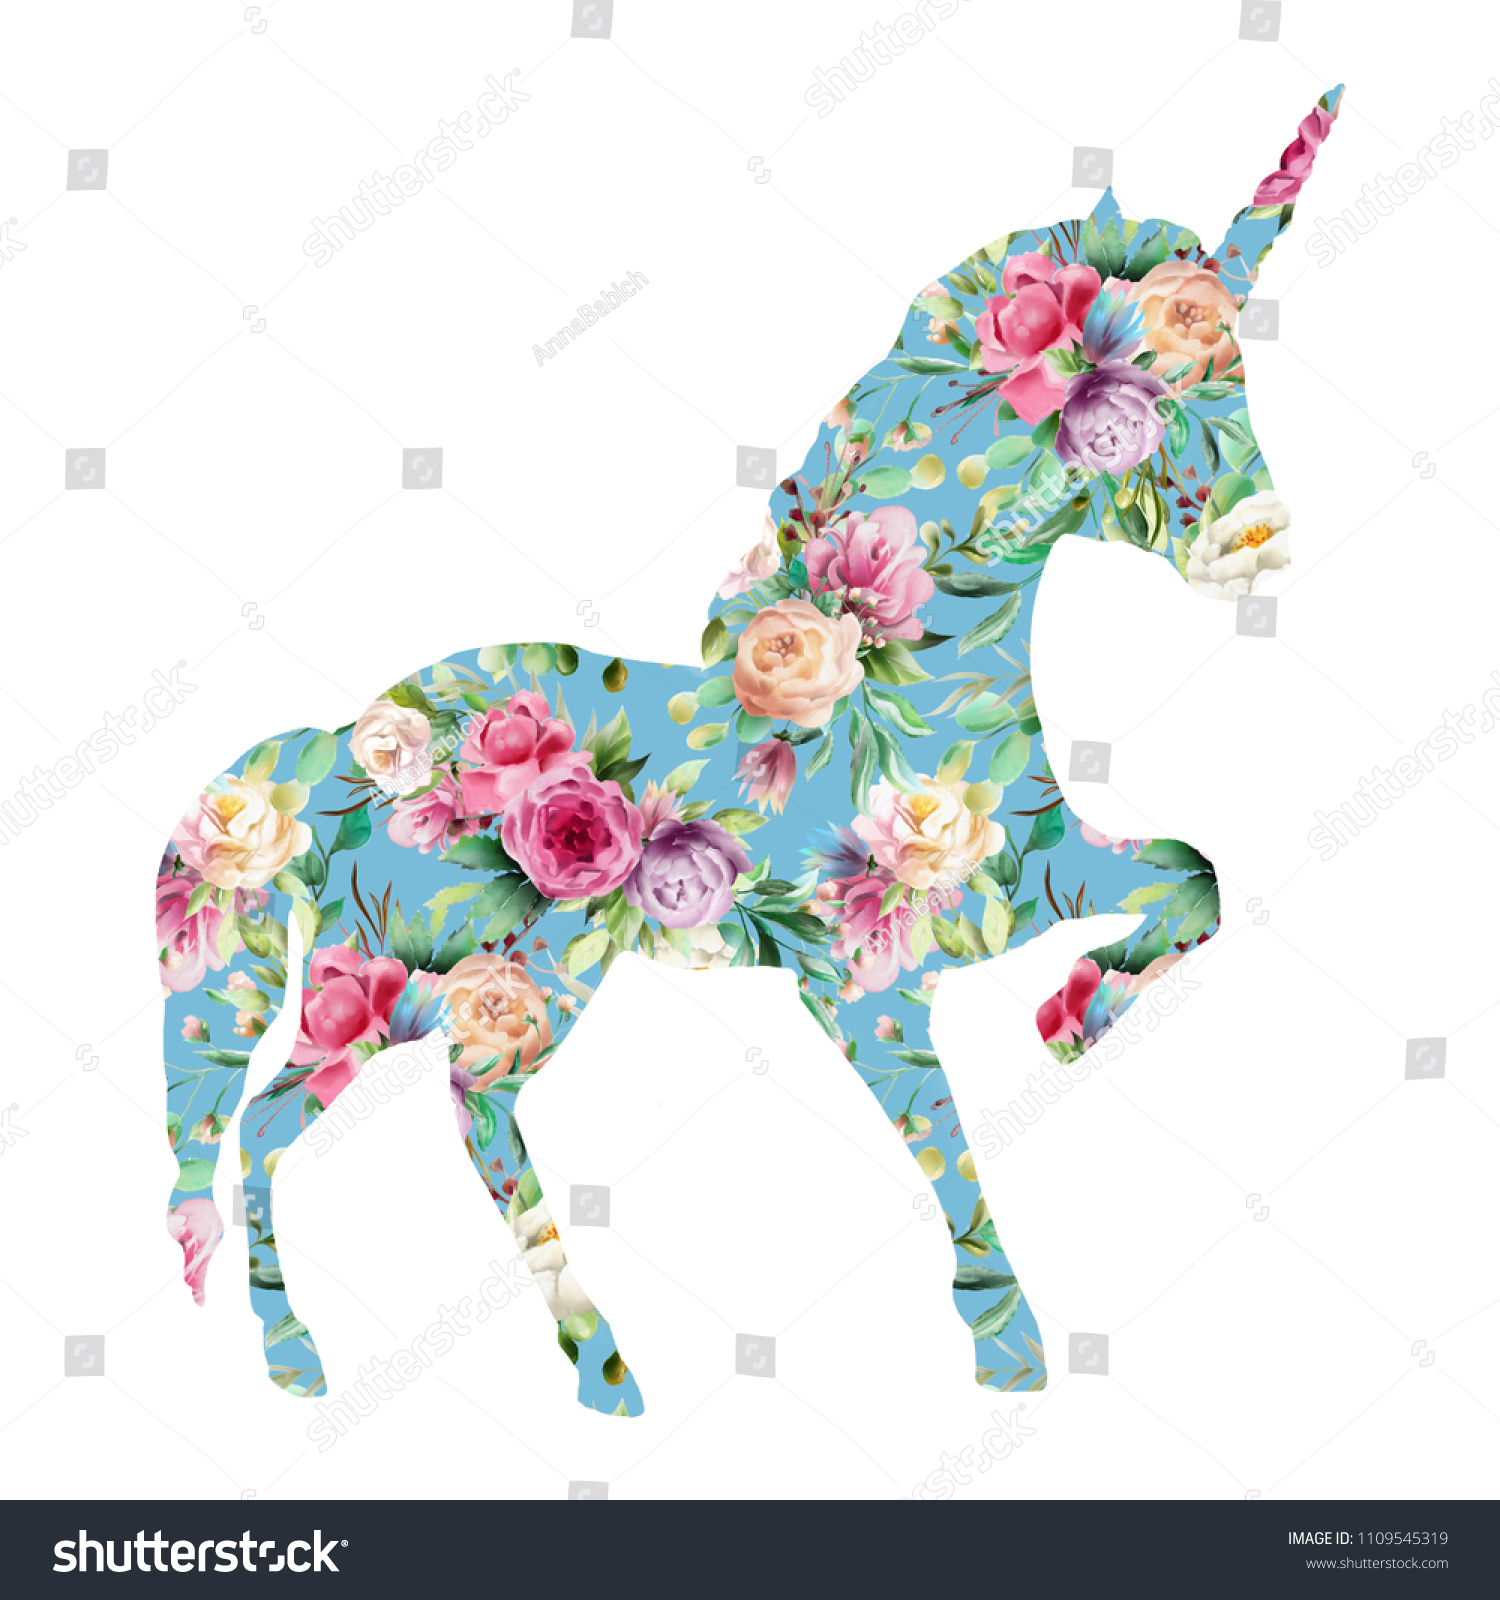 Fantasy Poster Picture Print Sizes A5 to A0 **FREE DELIVERY** MAGICAL UNICORN